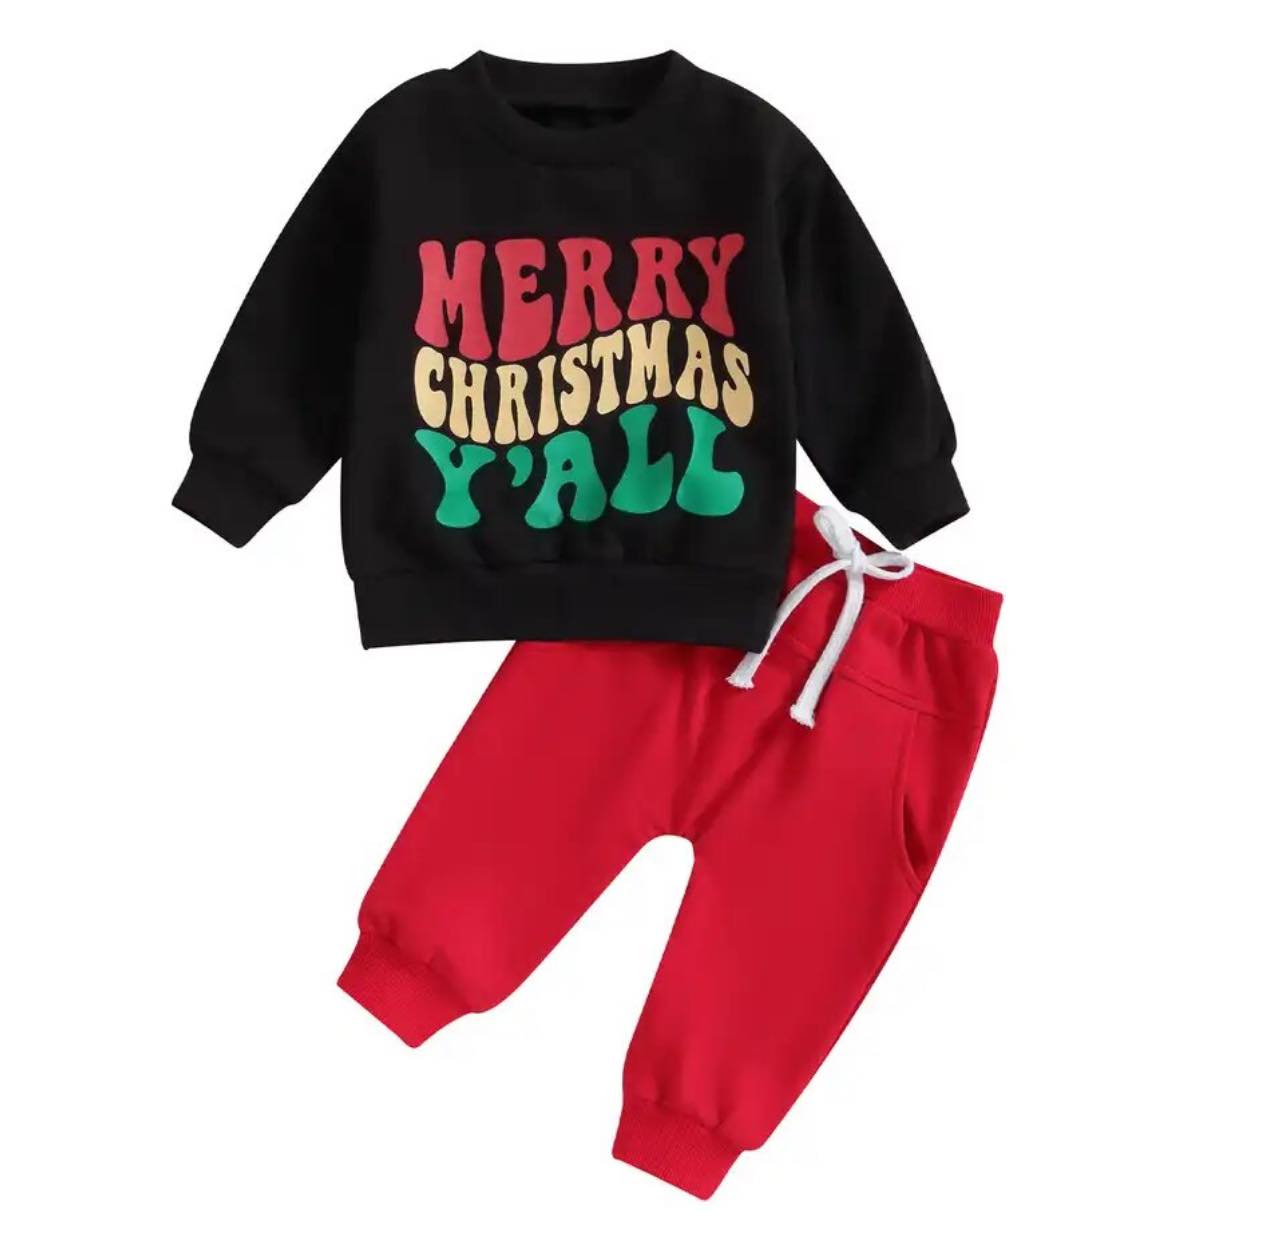 Boy's Merry Christmas Y'all Outfit